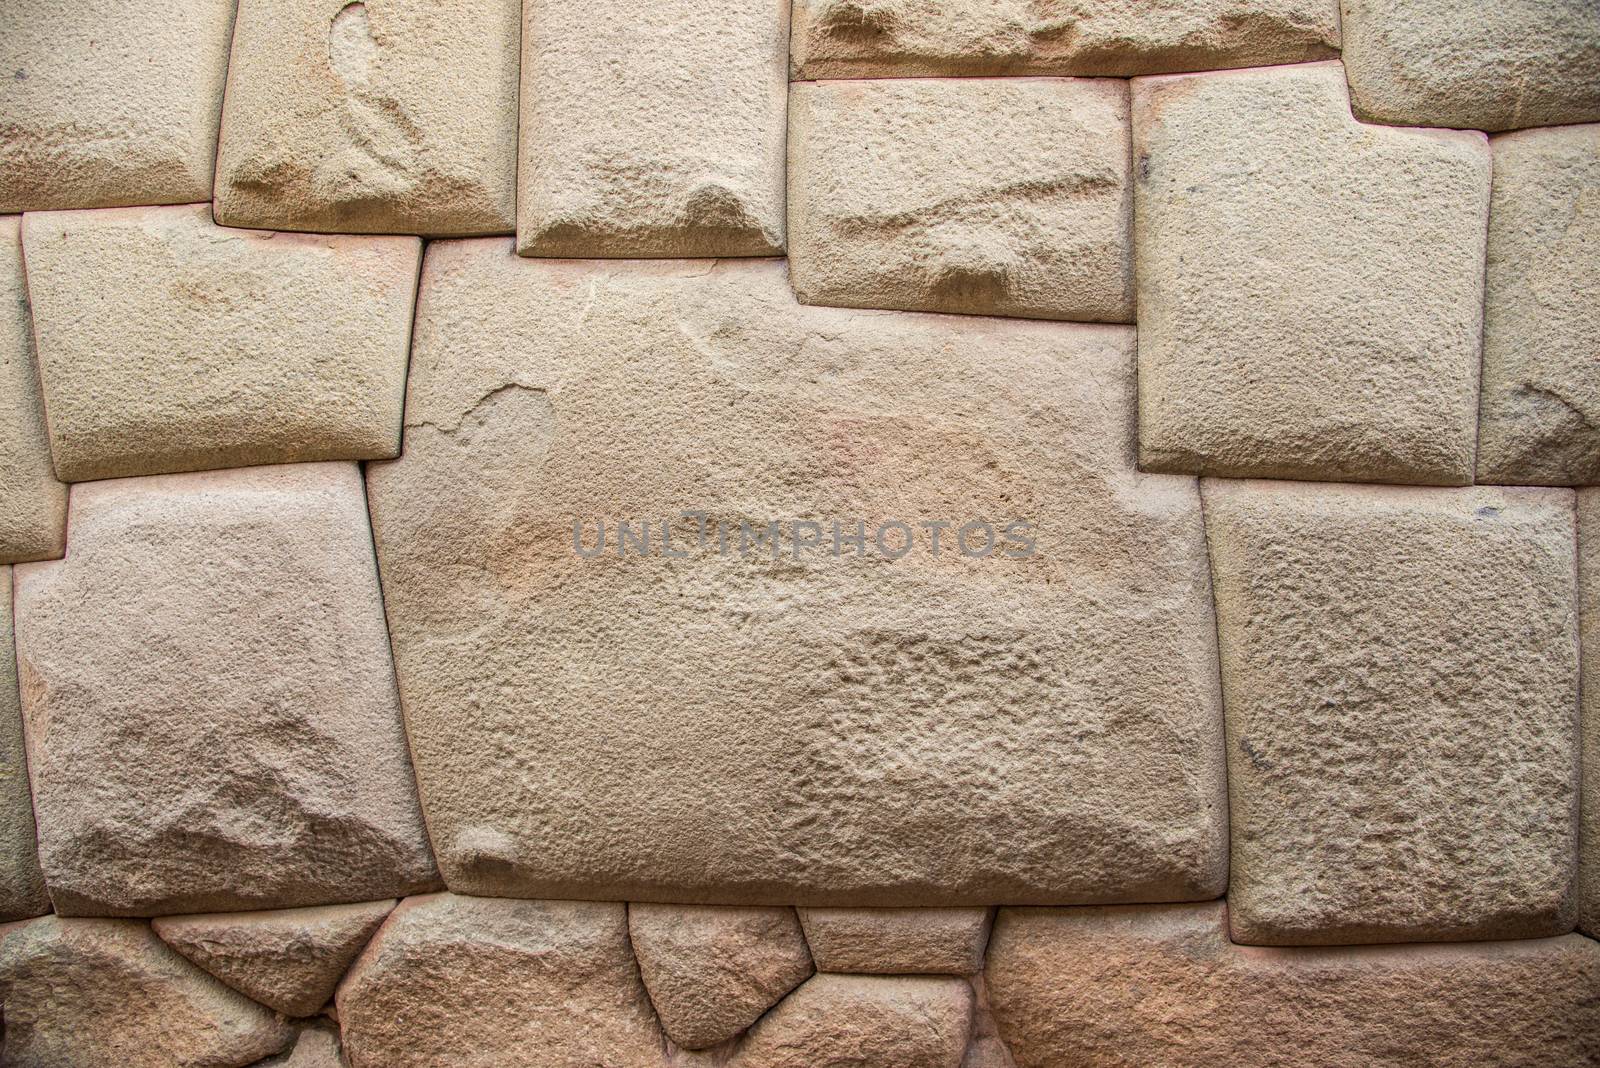 Inca Stone of 12 Angles in Cuzco Peru by rayints